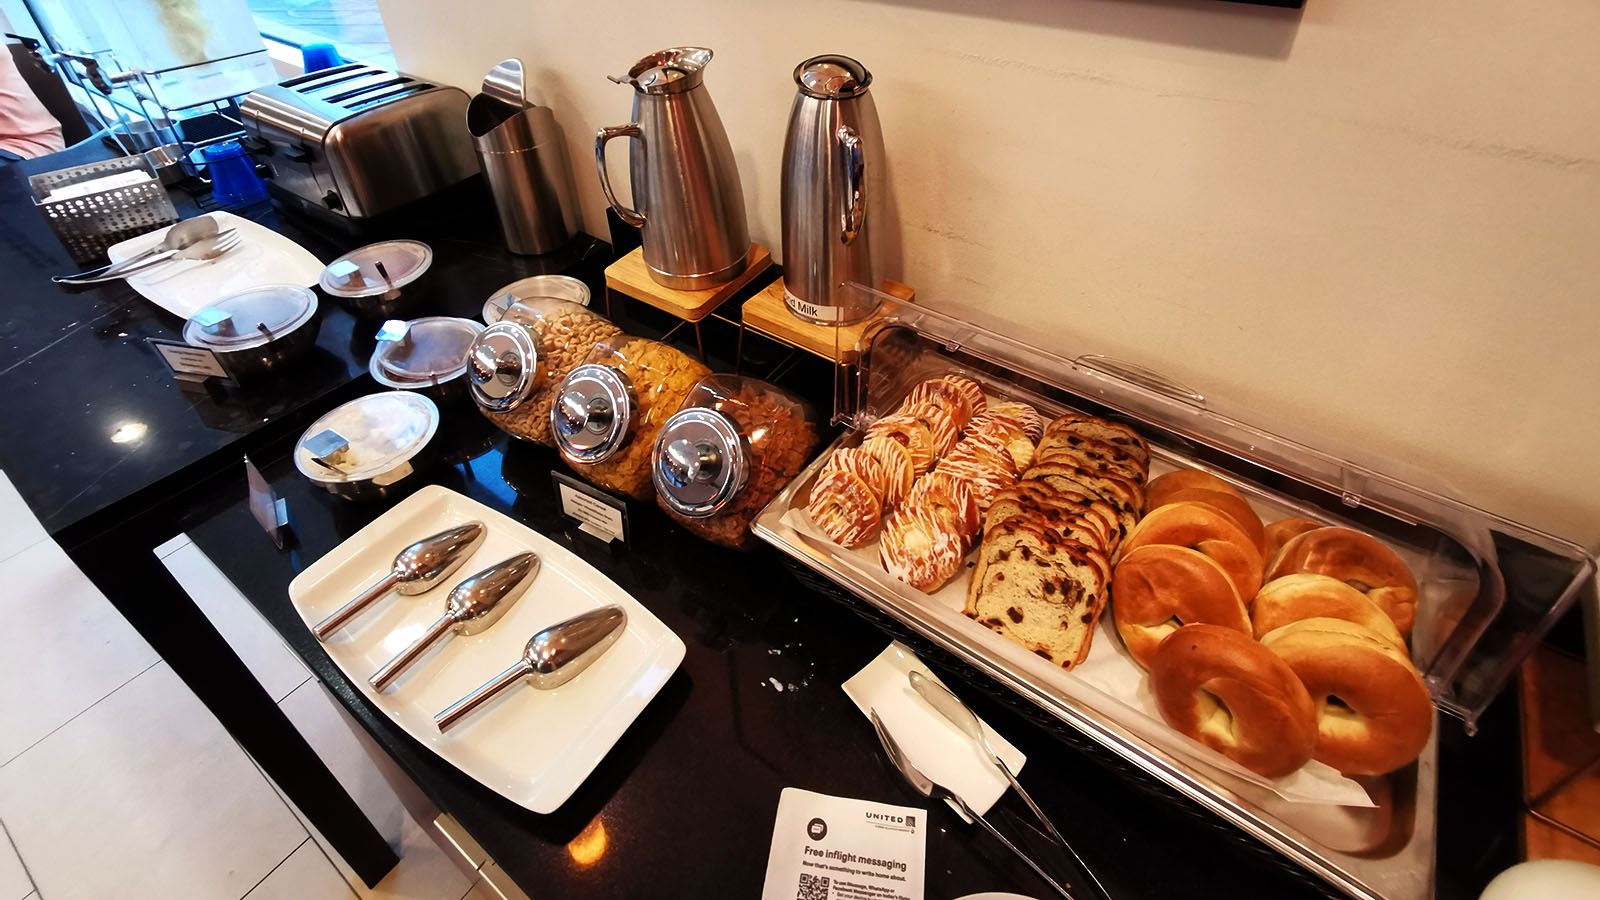 Breads and pastries in San Antonio United Club lounge